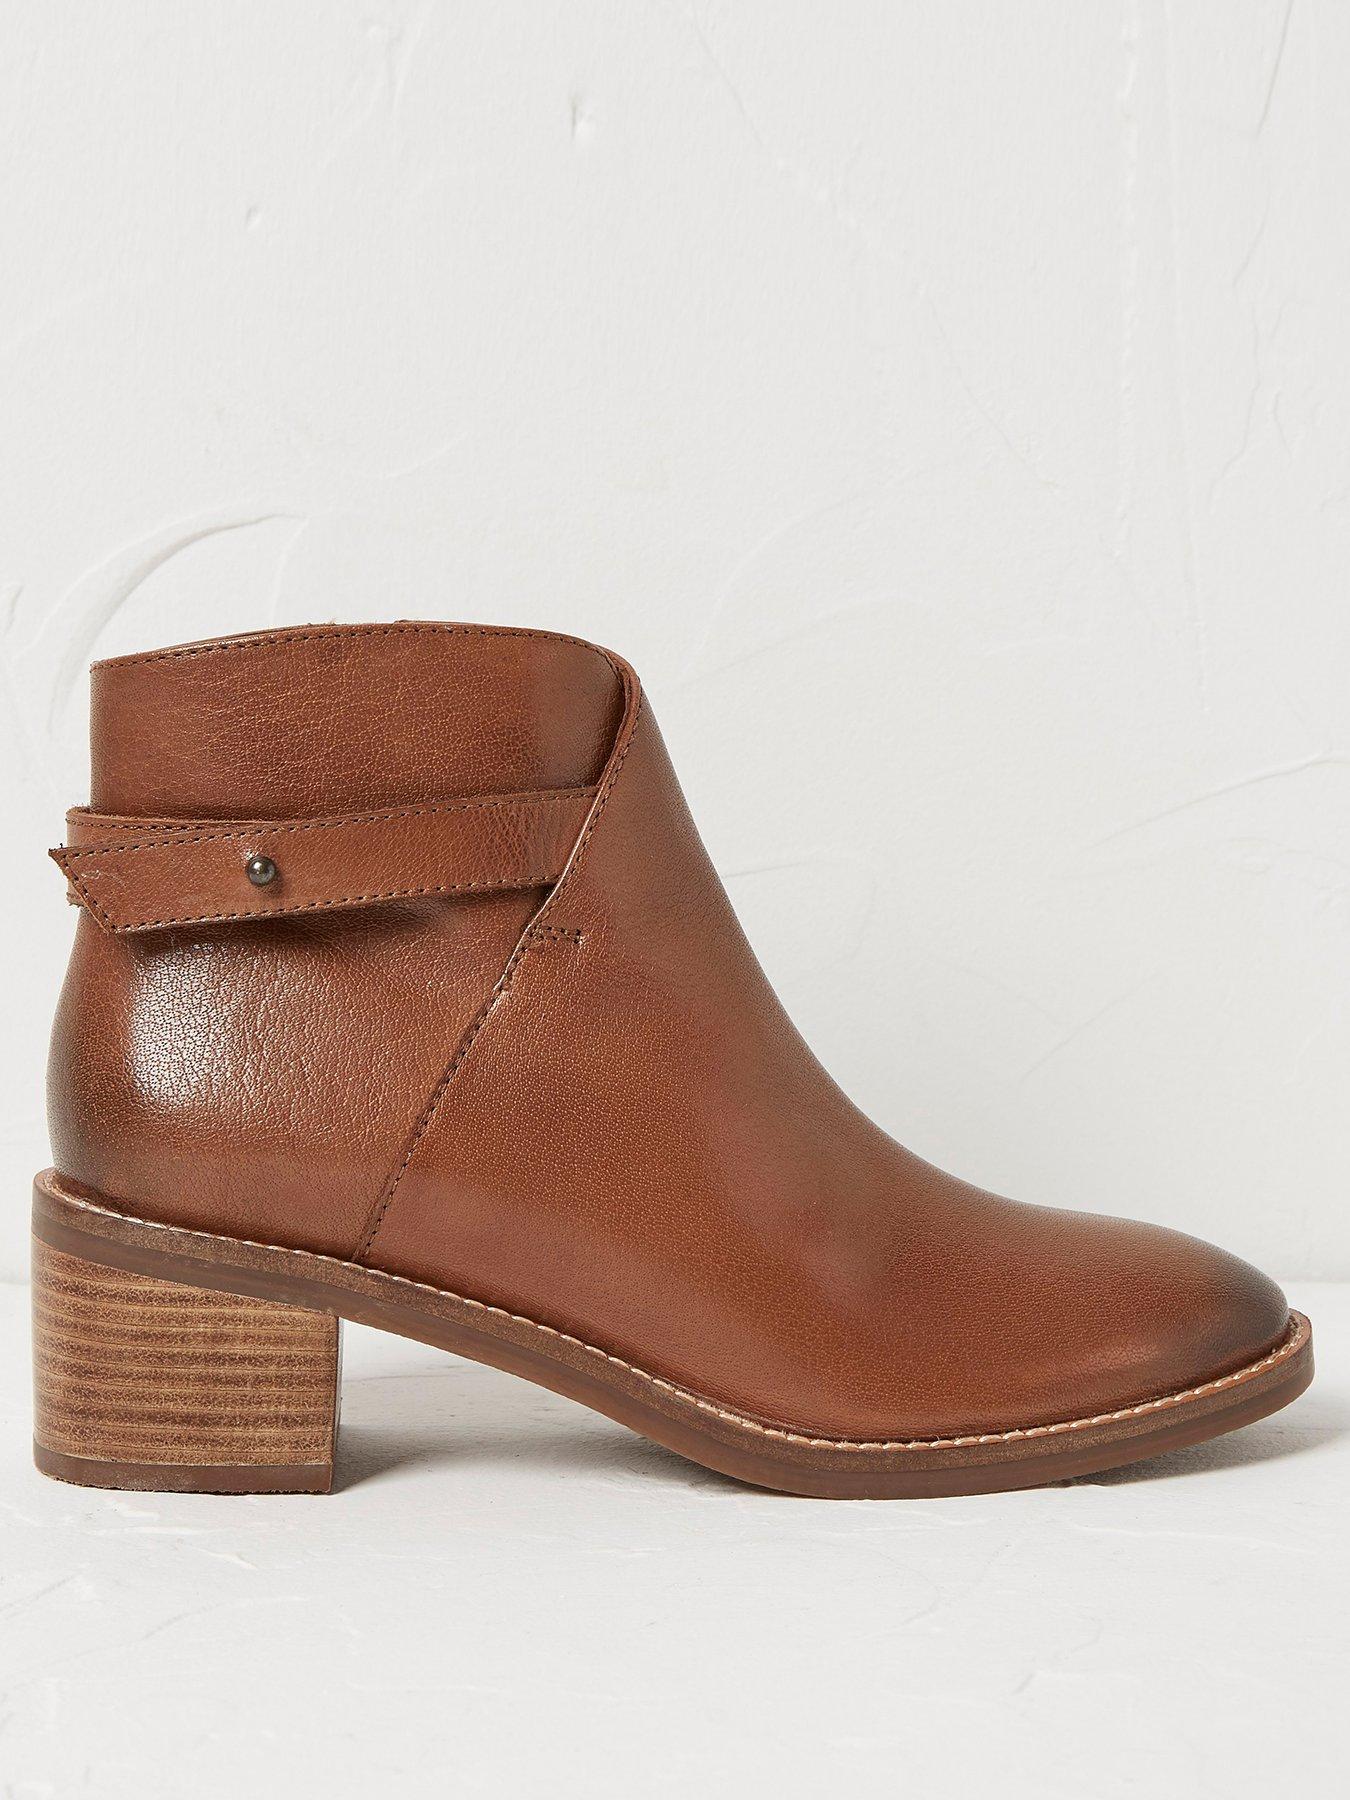 FatFace Salcombe Ankle Boot - Tan 